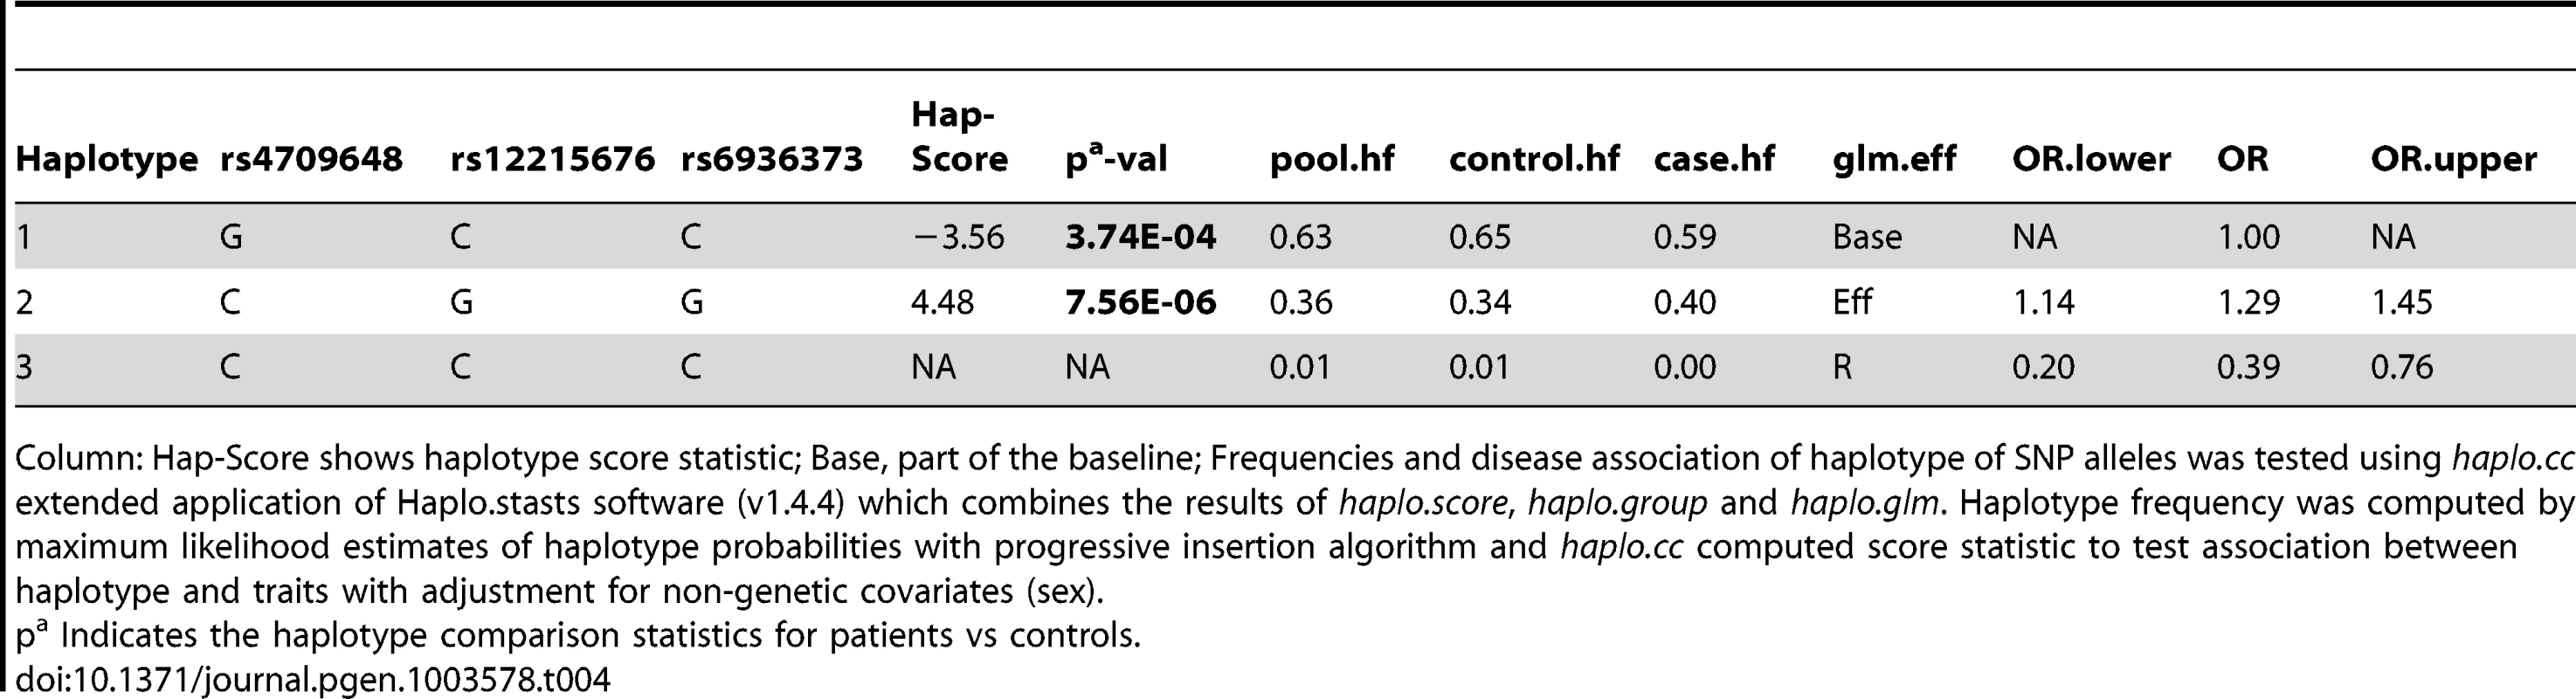 Haplotype structure, haplotype frequencies, significant <i>p</i> values and odds ratio between patients versus healthy controls of 3 SNPs representing BIN-2 of Indian population.